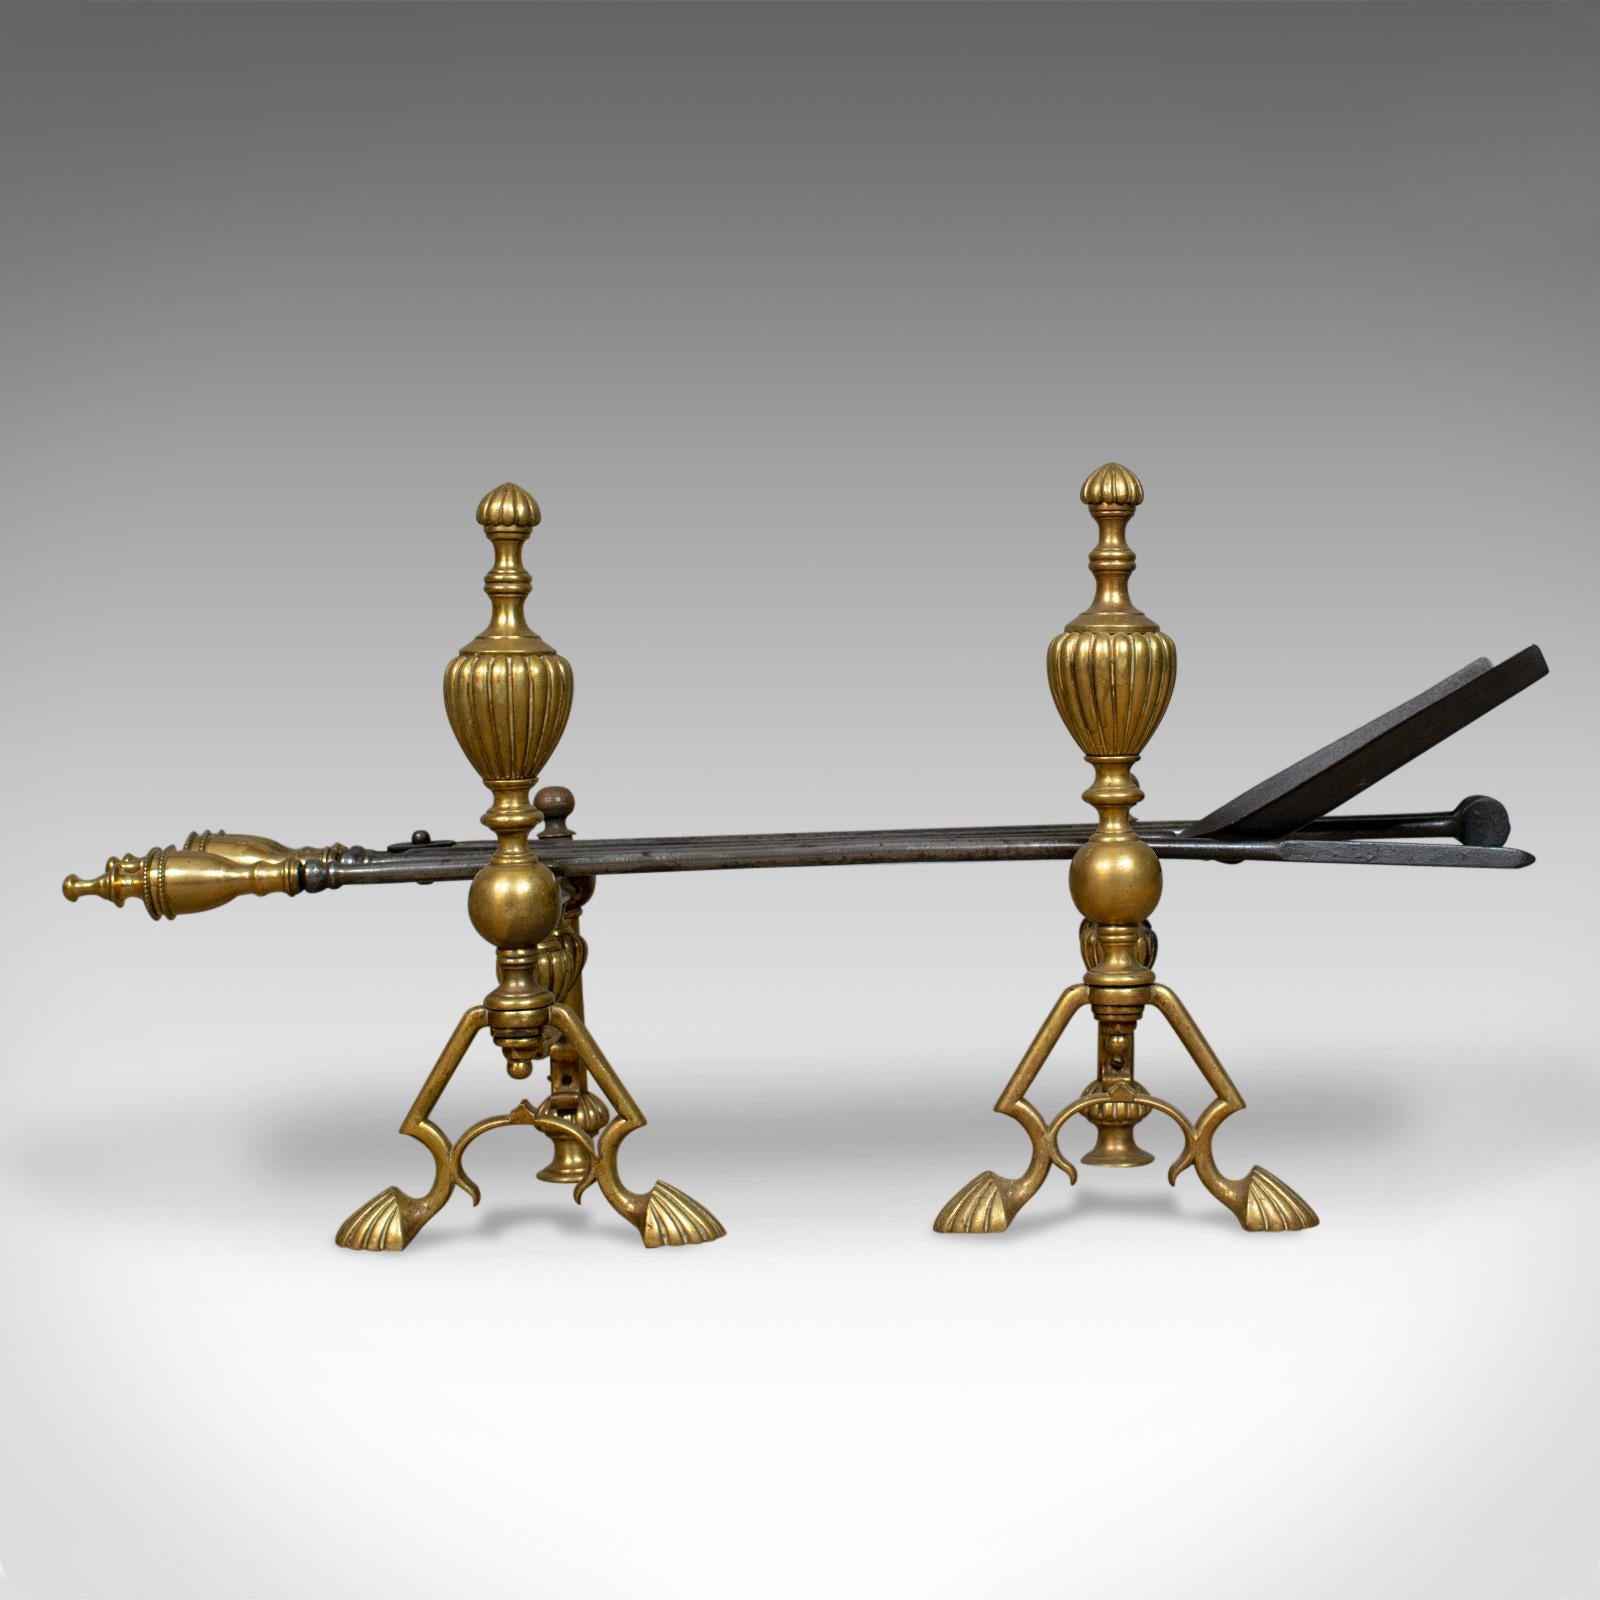 This is an antique companion set of fire-irons on rests. An English, Victorian, classical revival, set of fire tools in brass and iron and dating to the late 19th century, circa 1880.

Attractive handwrought ironwork tools
A poker, shovel and